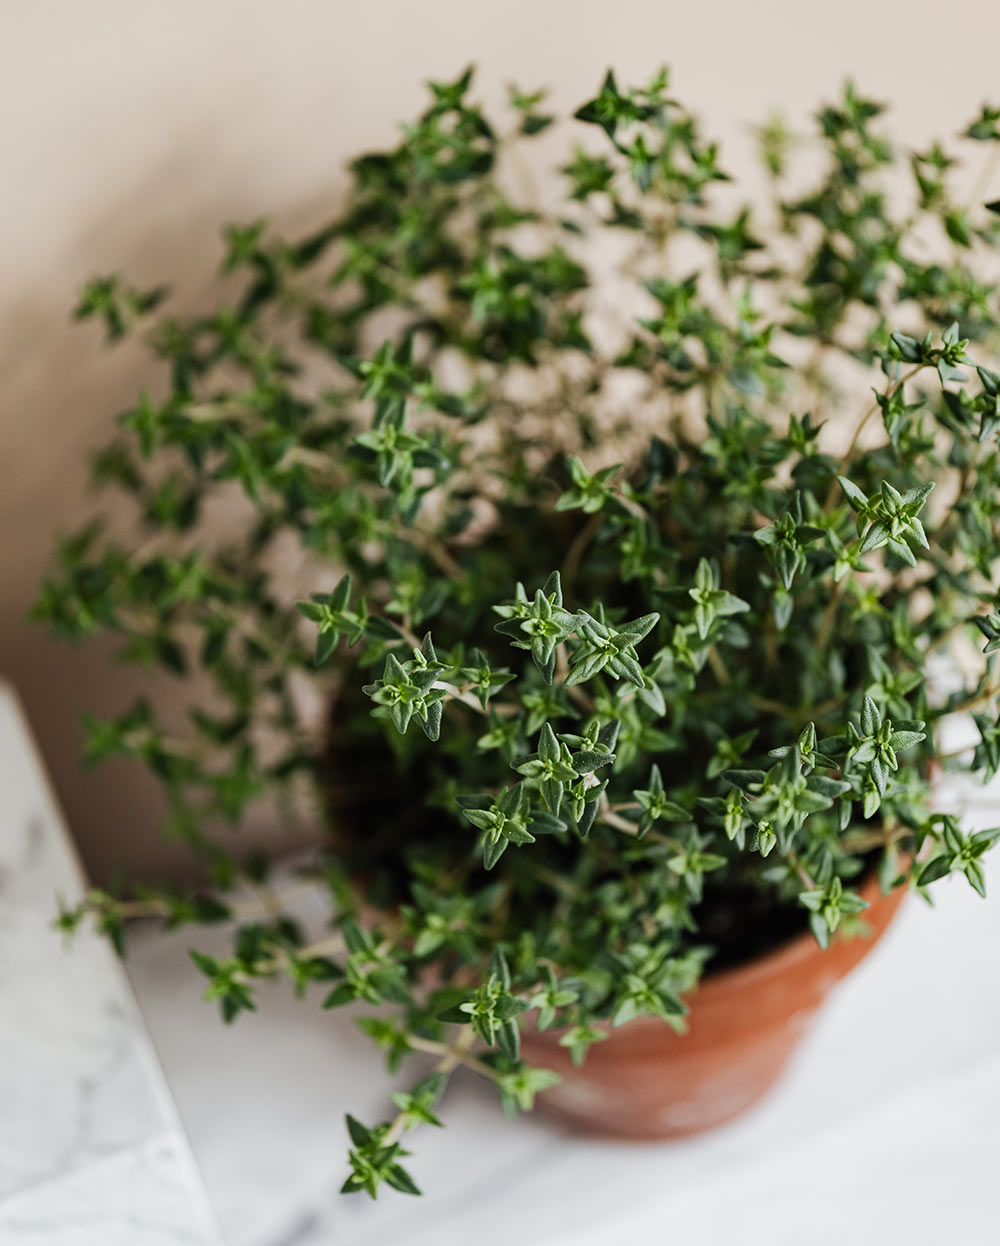 Grow your own thyme at home - Carousell Philippines